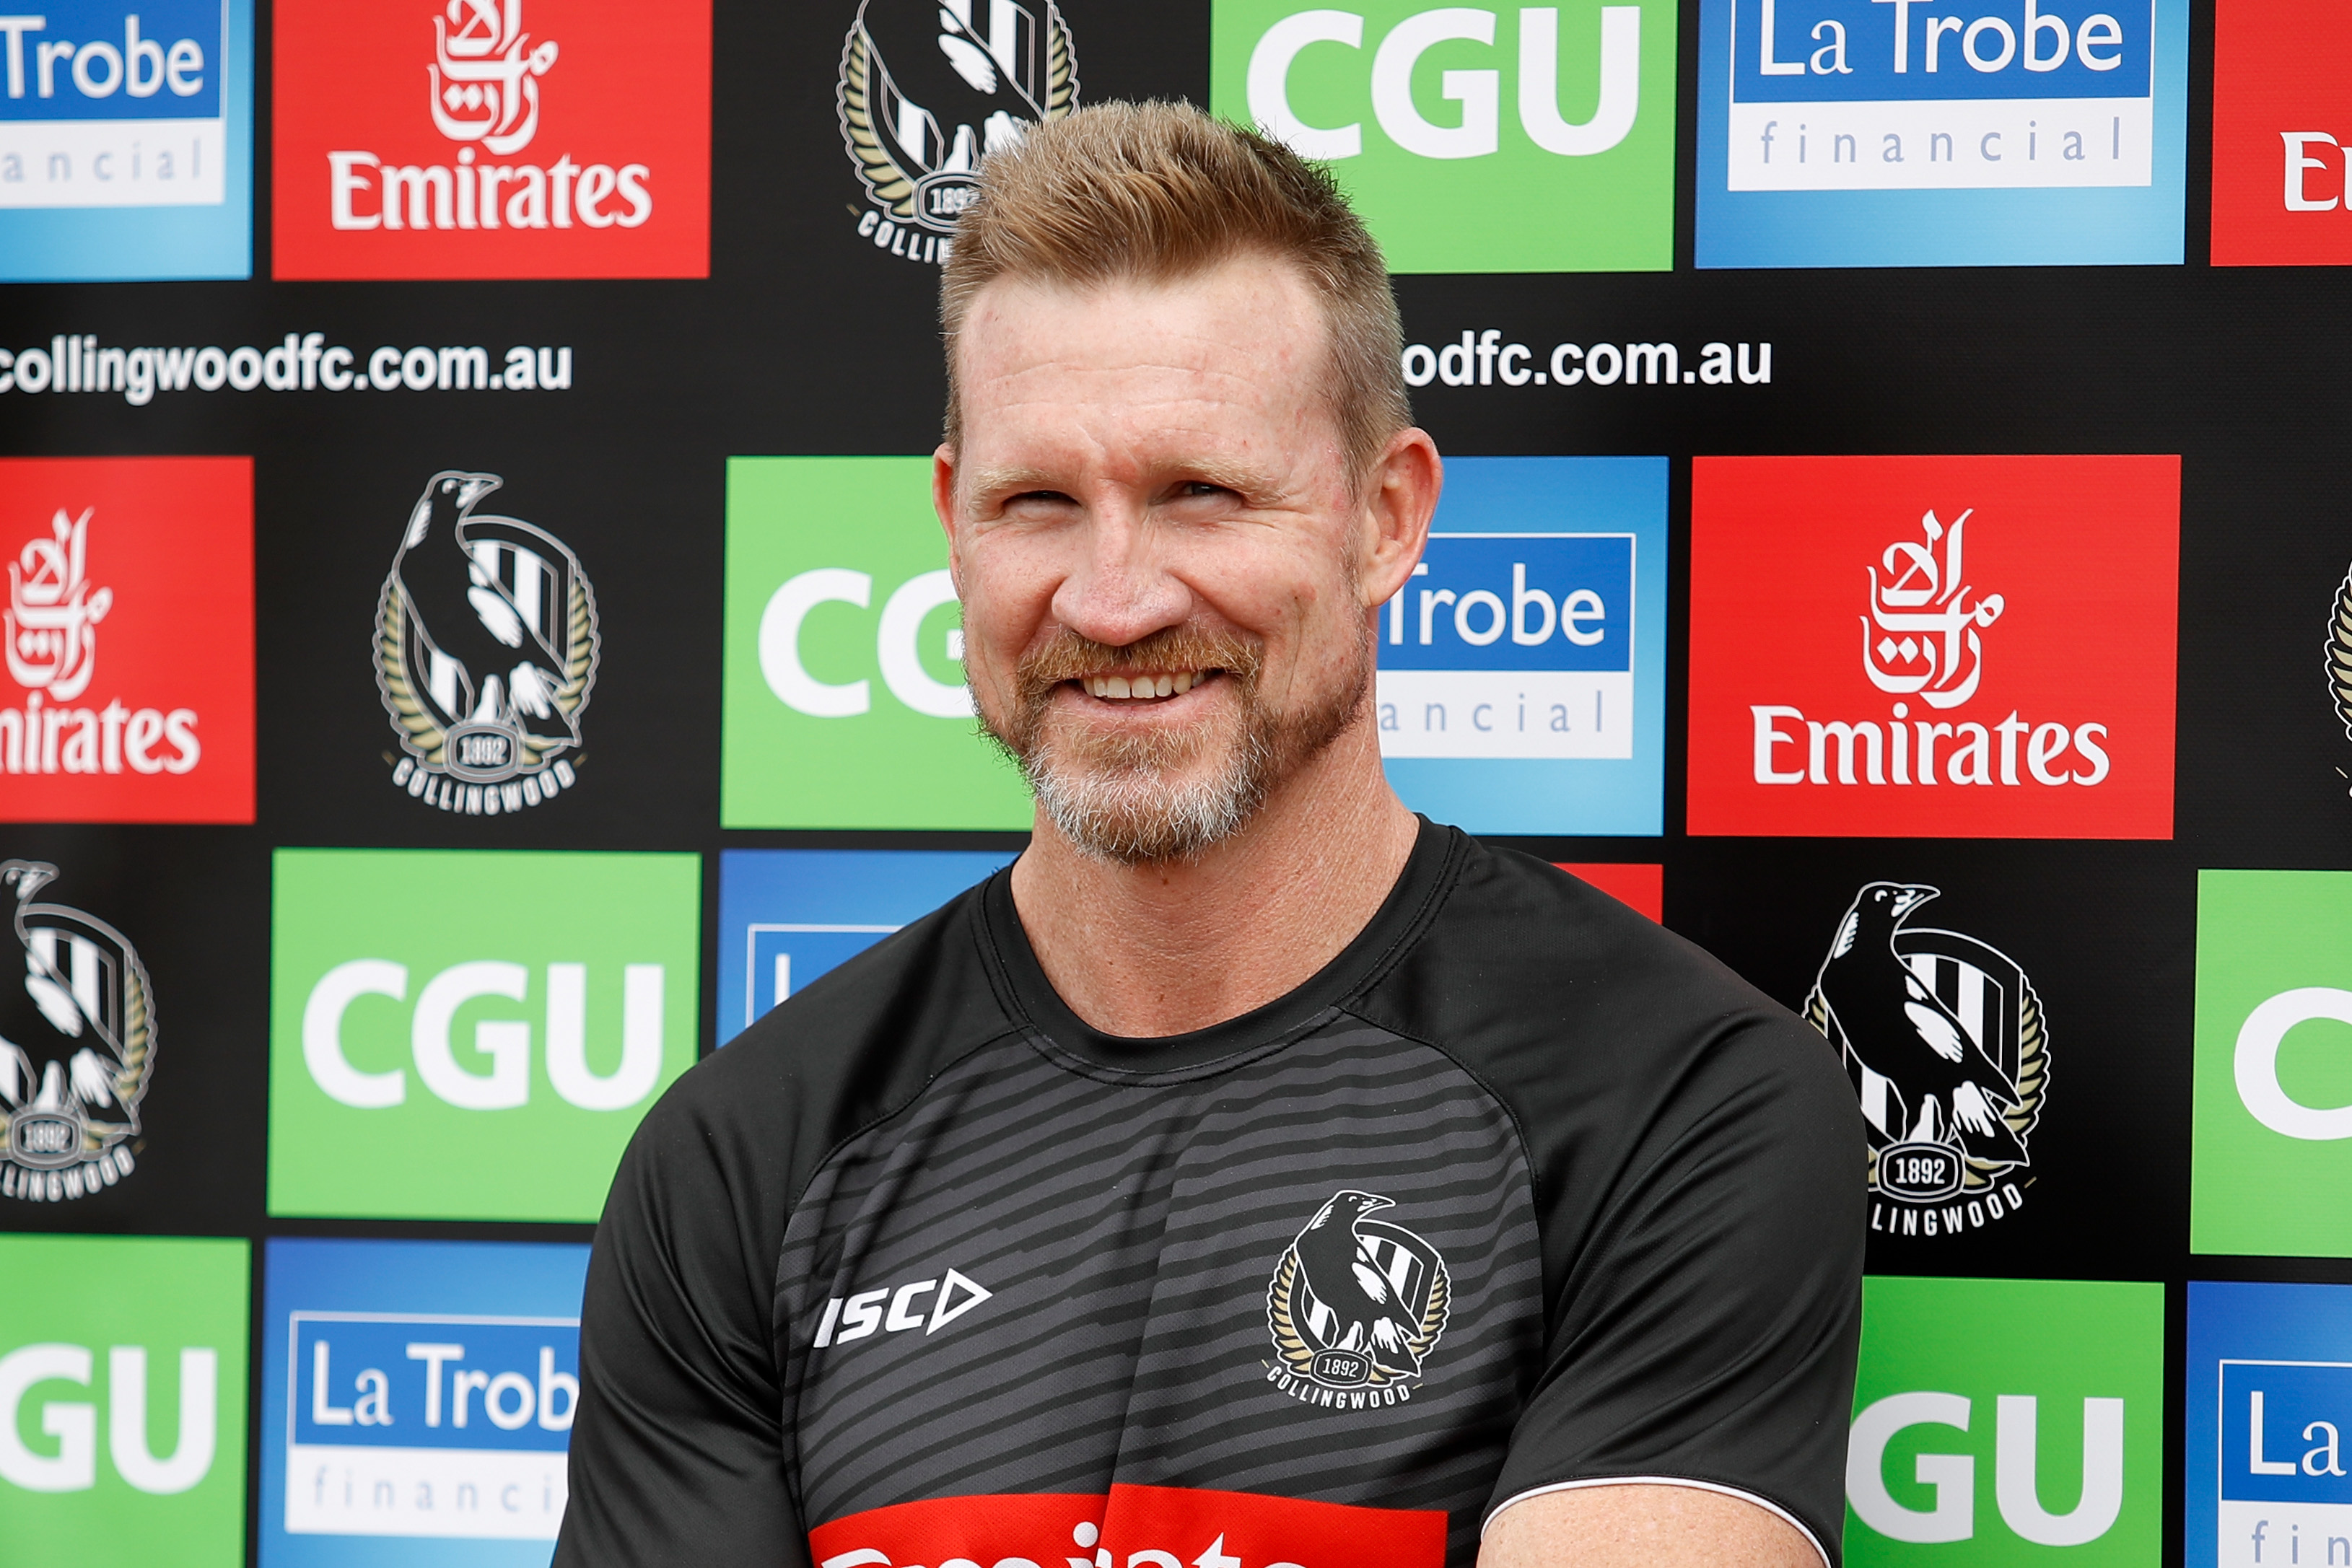 Nathan Buckley, Senior Coach of the Magpies speaks to the media during the Collingwood Magpies training session at Olympic Park Oval on March 18, 2020 in Melbourne, Australia.